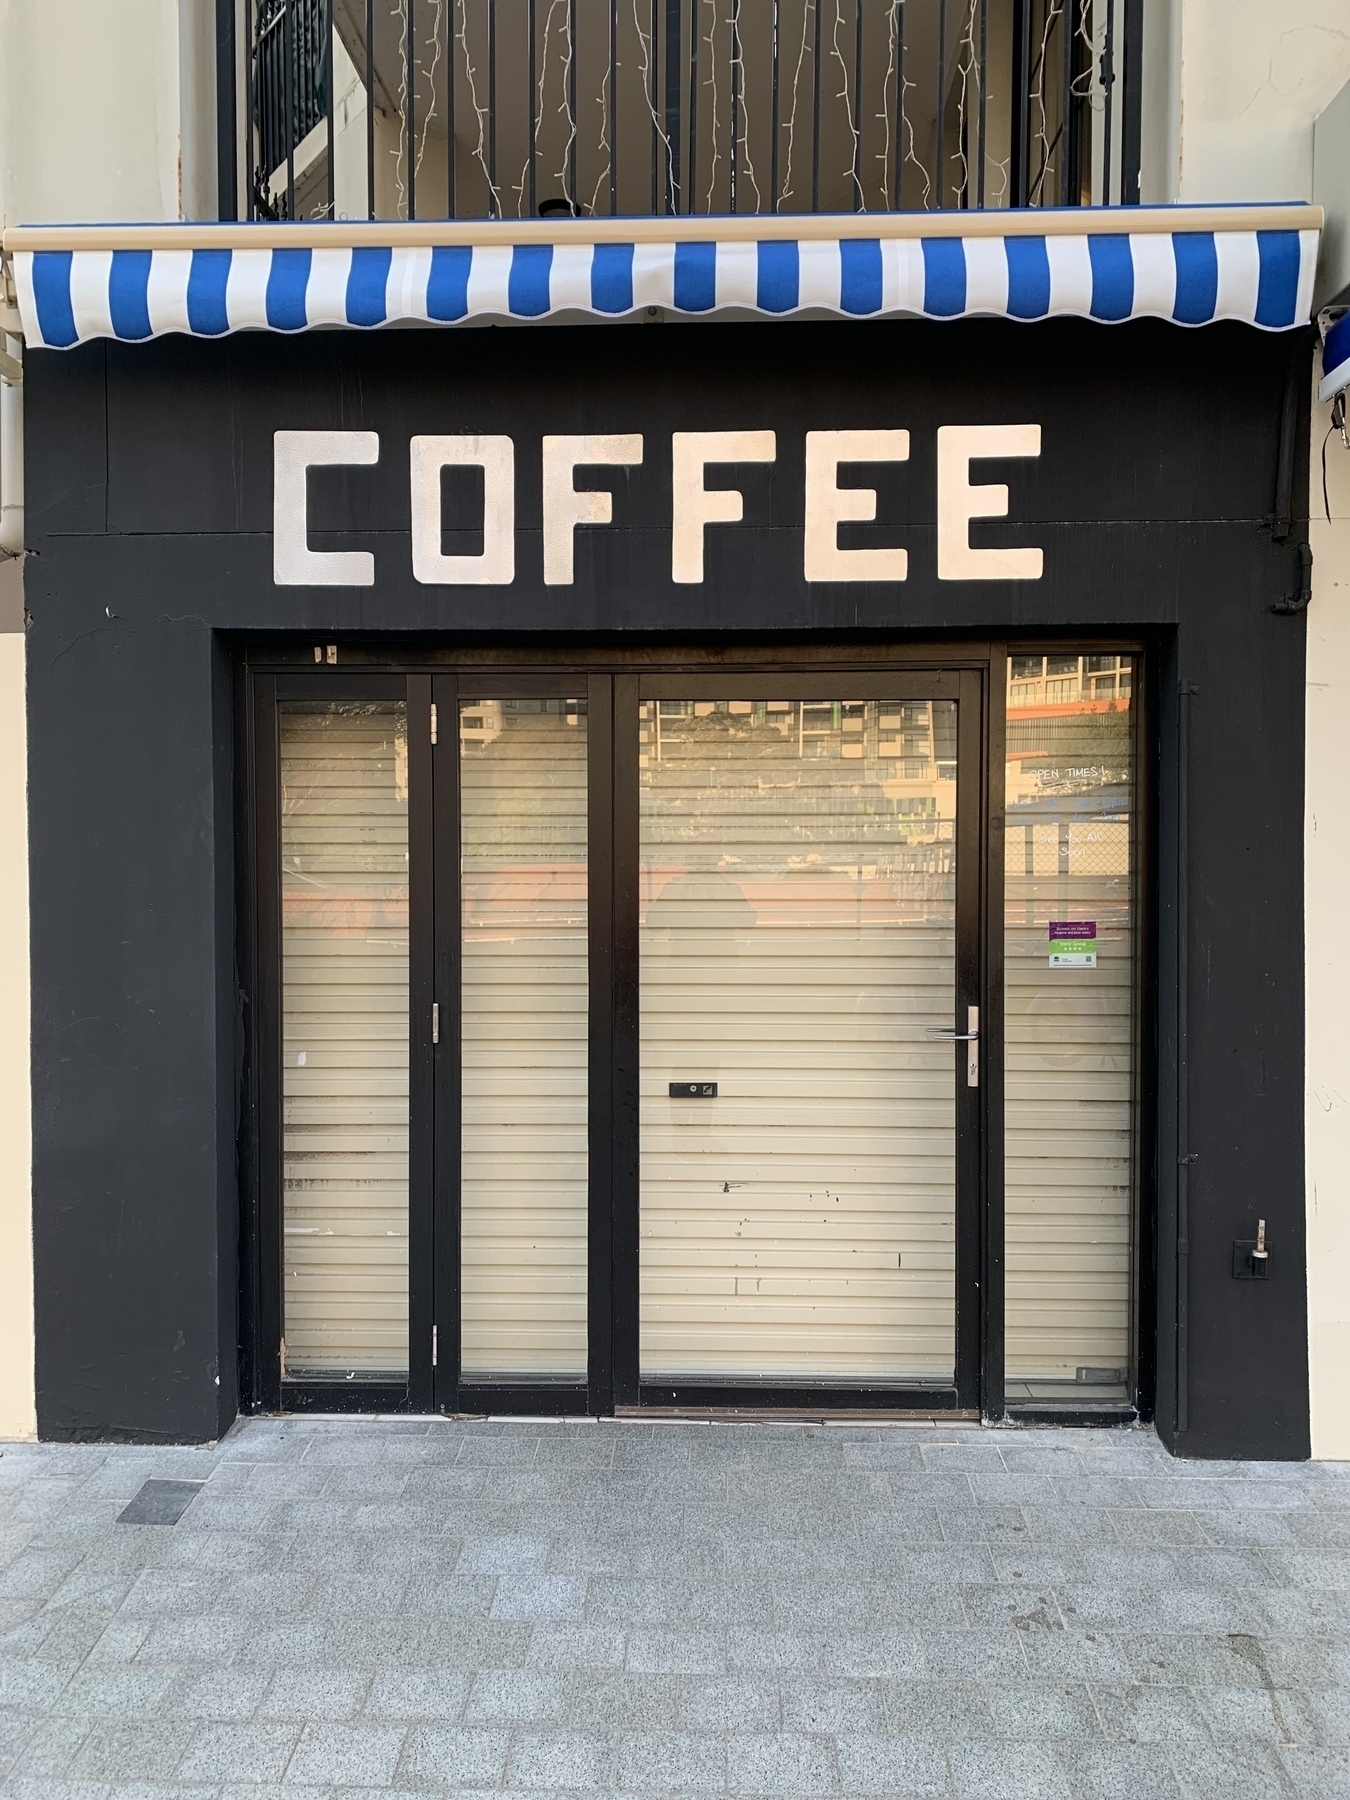 Photo of a closed shop front with glass walls (in front of a closed roller shutter) with a large “COFFEE” sign above the entrance